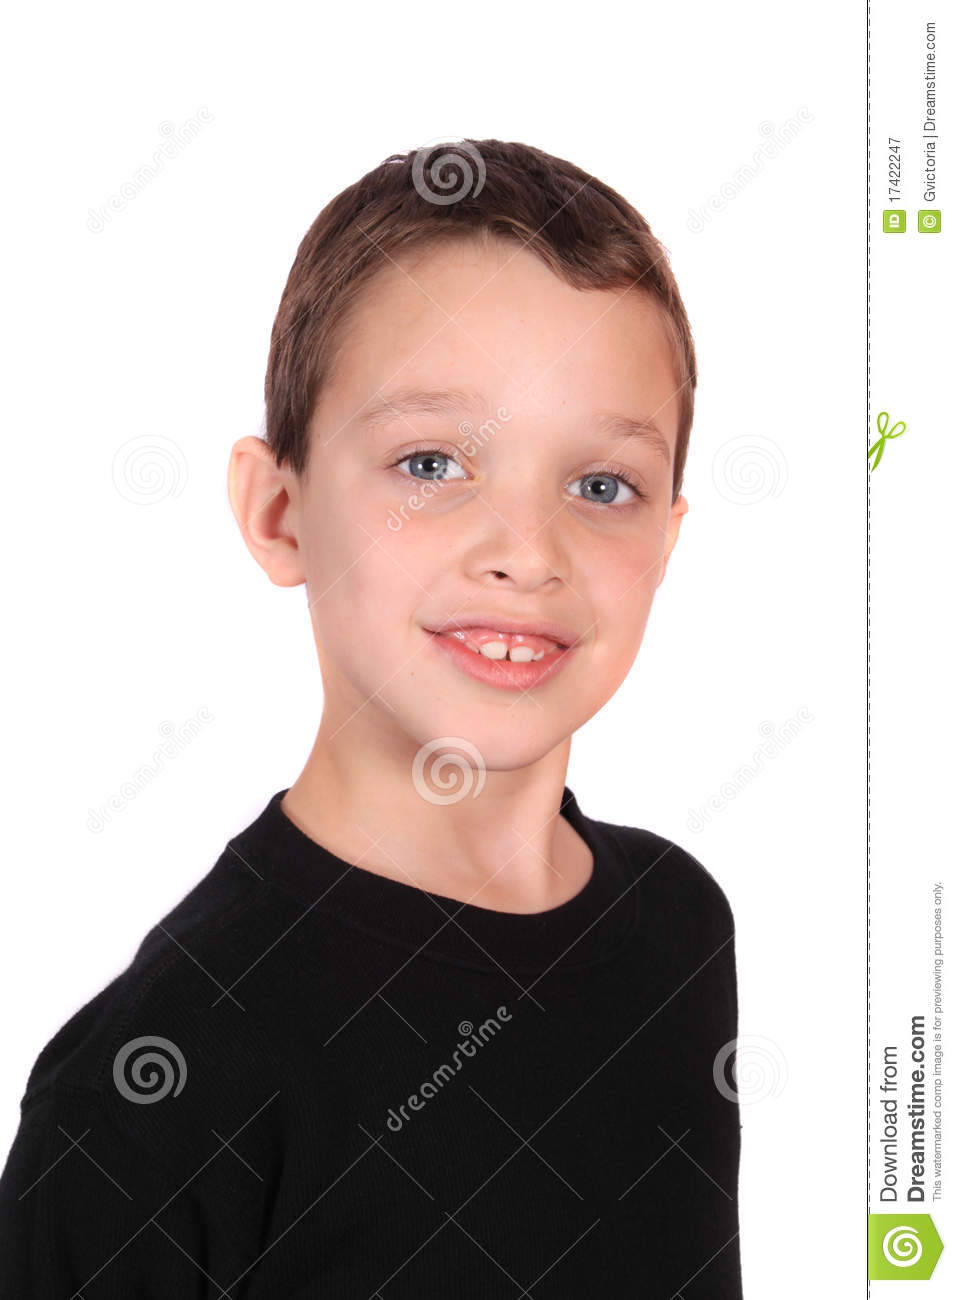 Eight Year Old Boy Royalty Free Stock Photography   Image  17422247